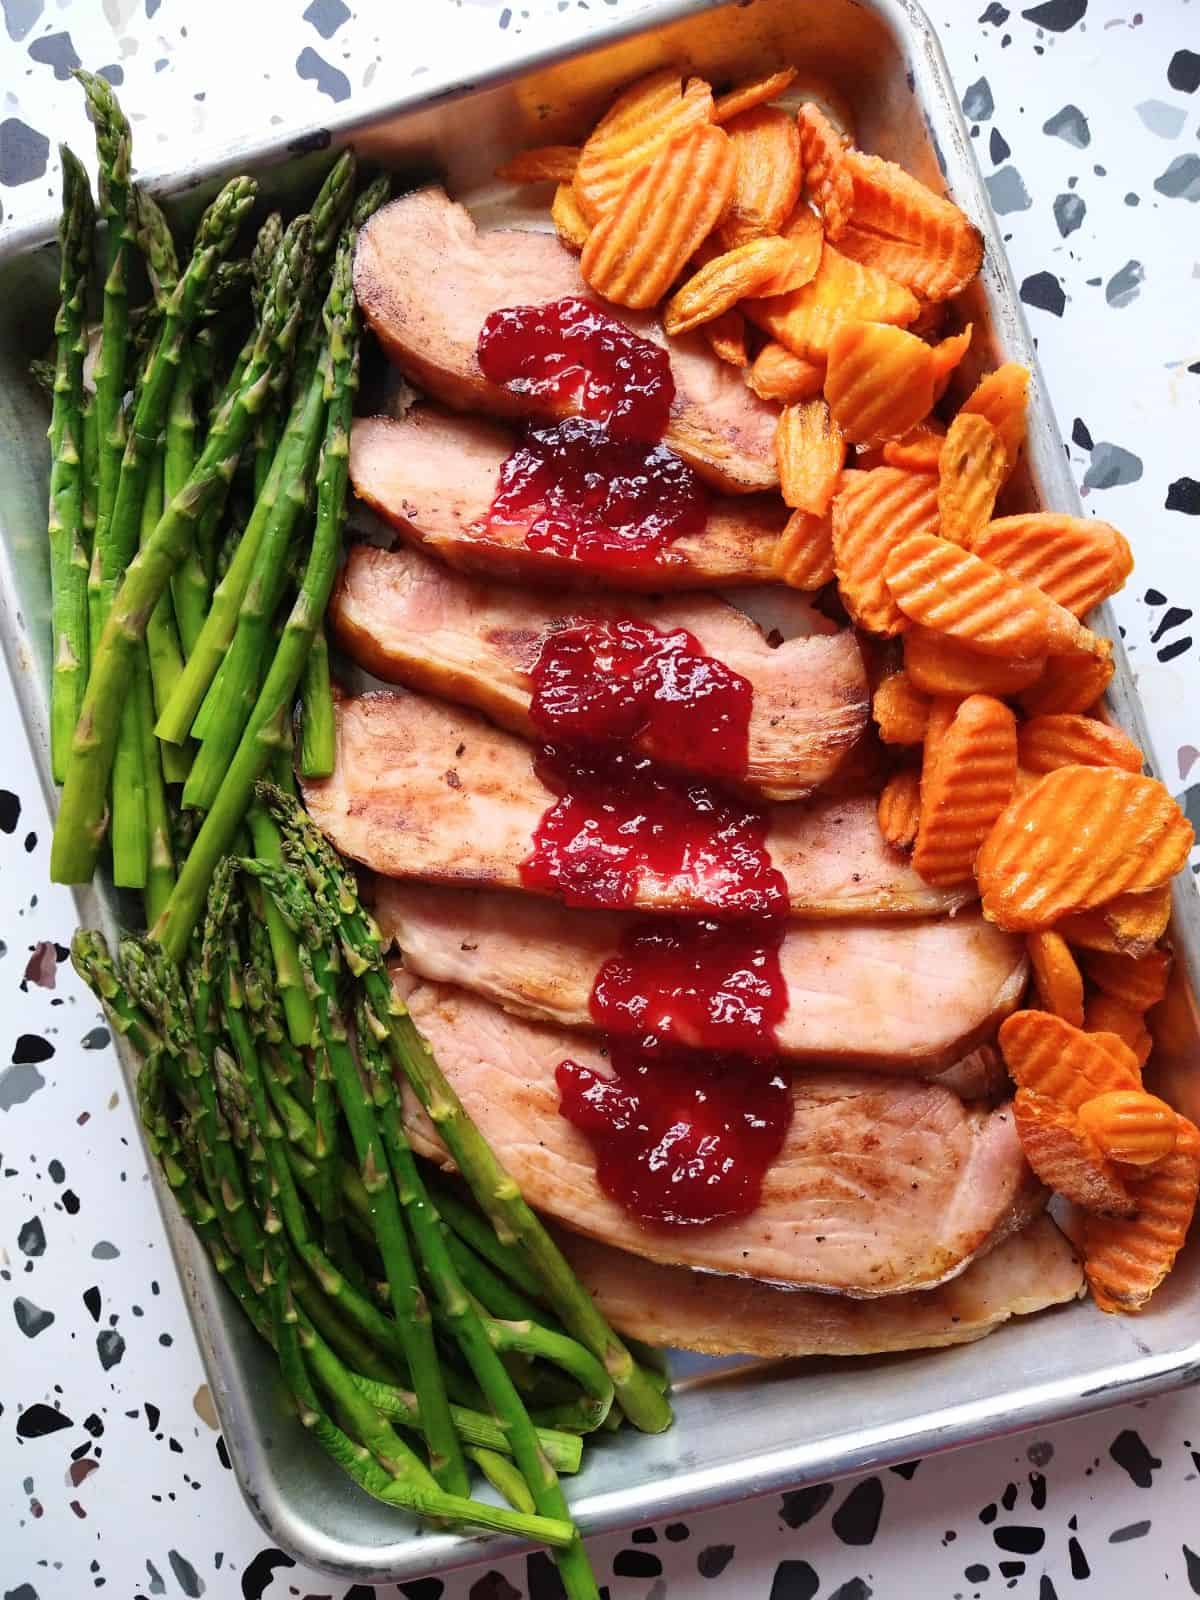 Slices of ham on a sheet pan topped with cherry jam next to crinkle cut carrots and cooked asparagus.